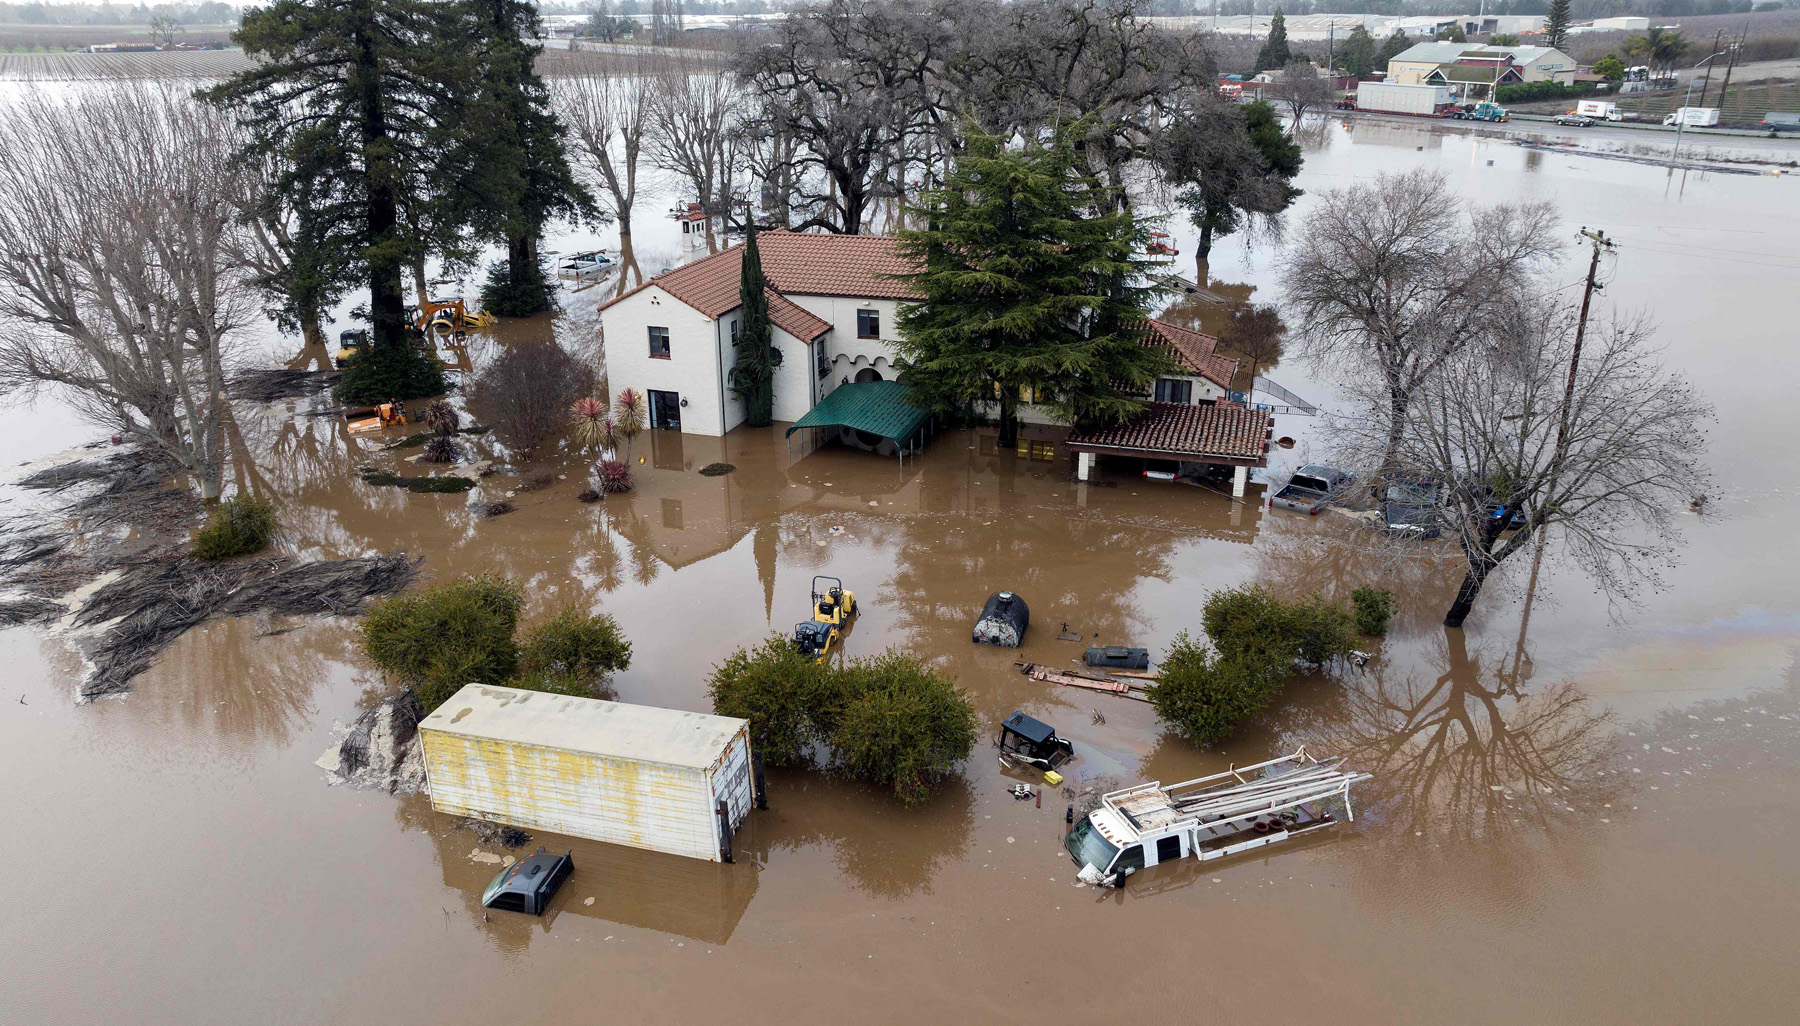 This aerial view shows a flooded home partially underwater in Gilroy, California, on January 9, 2023. - A massive storm called a bomb cyclone